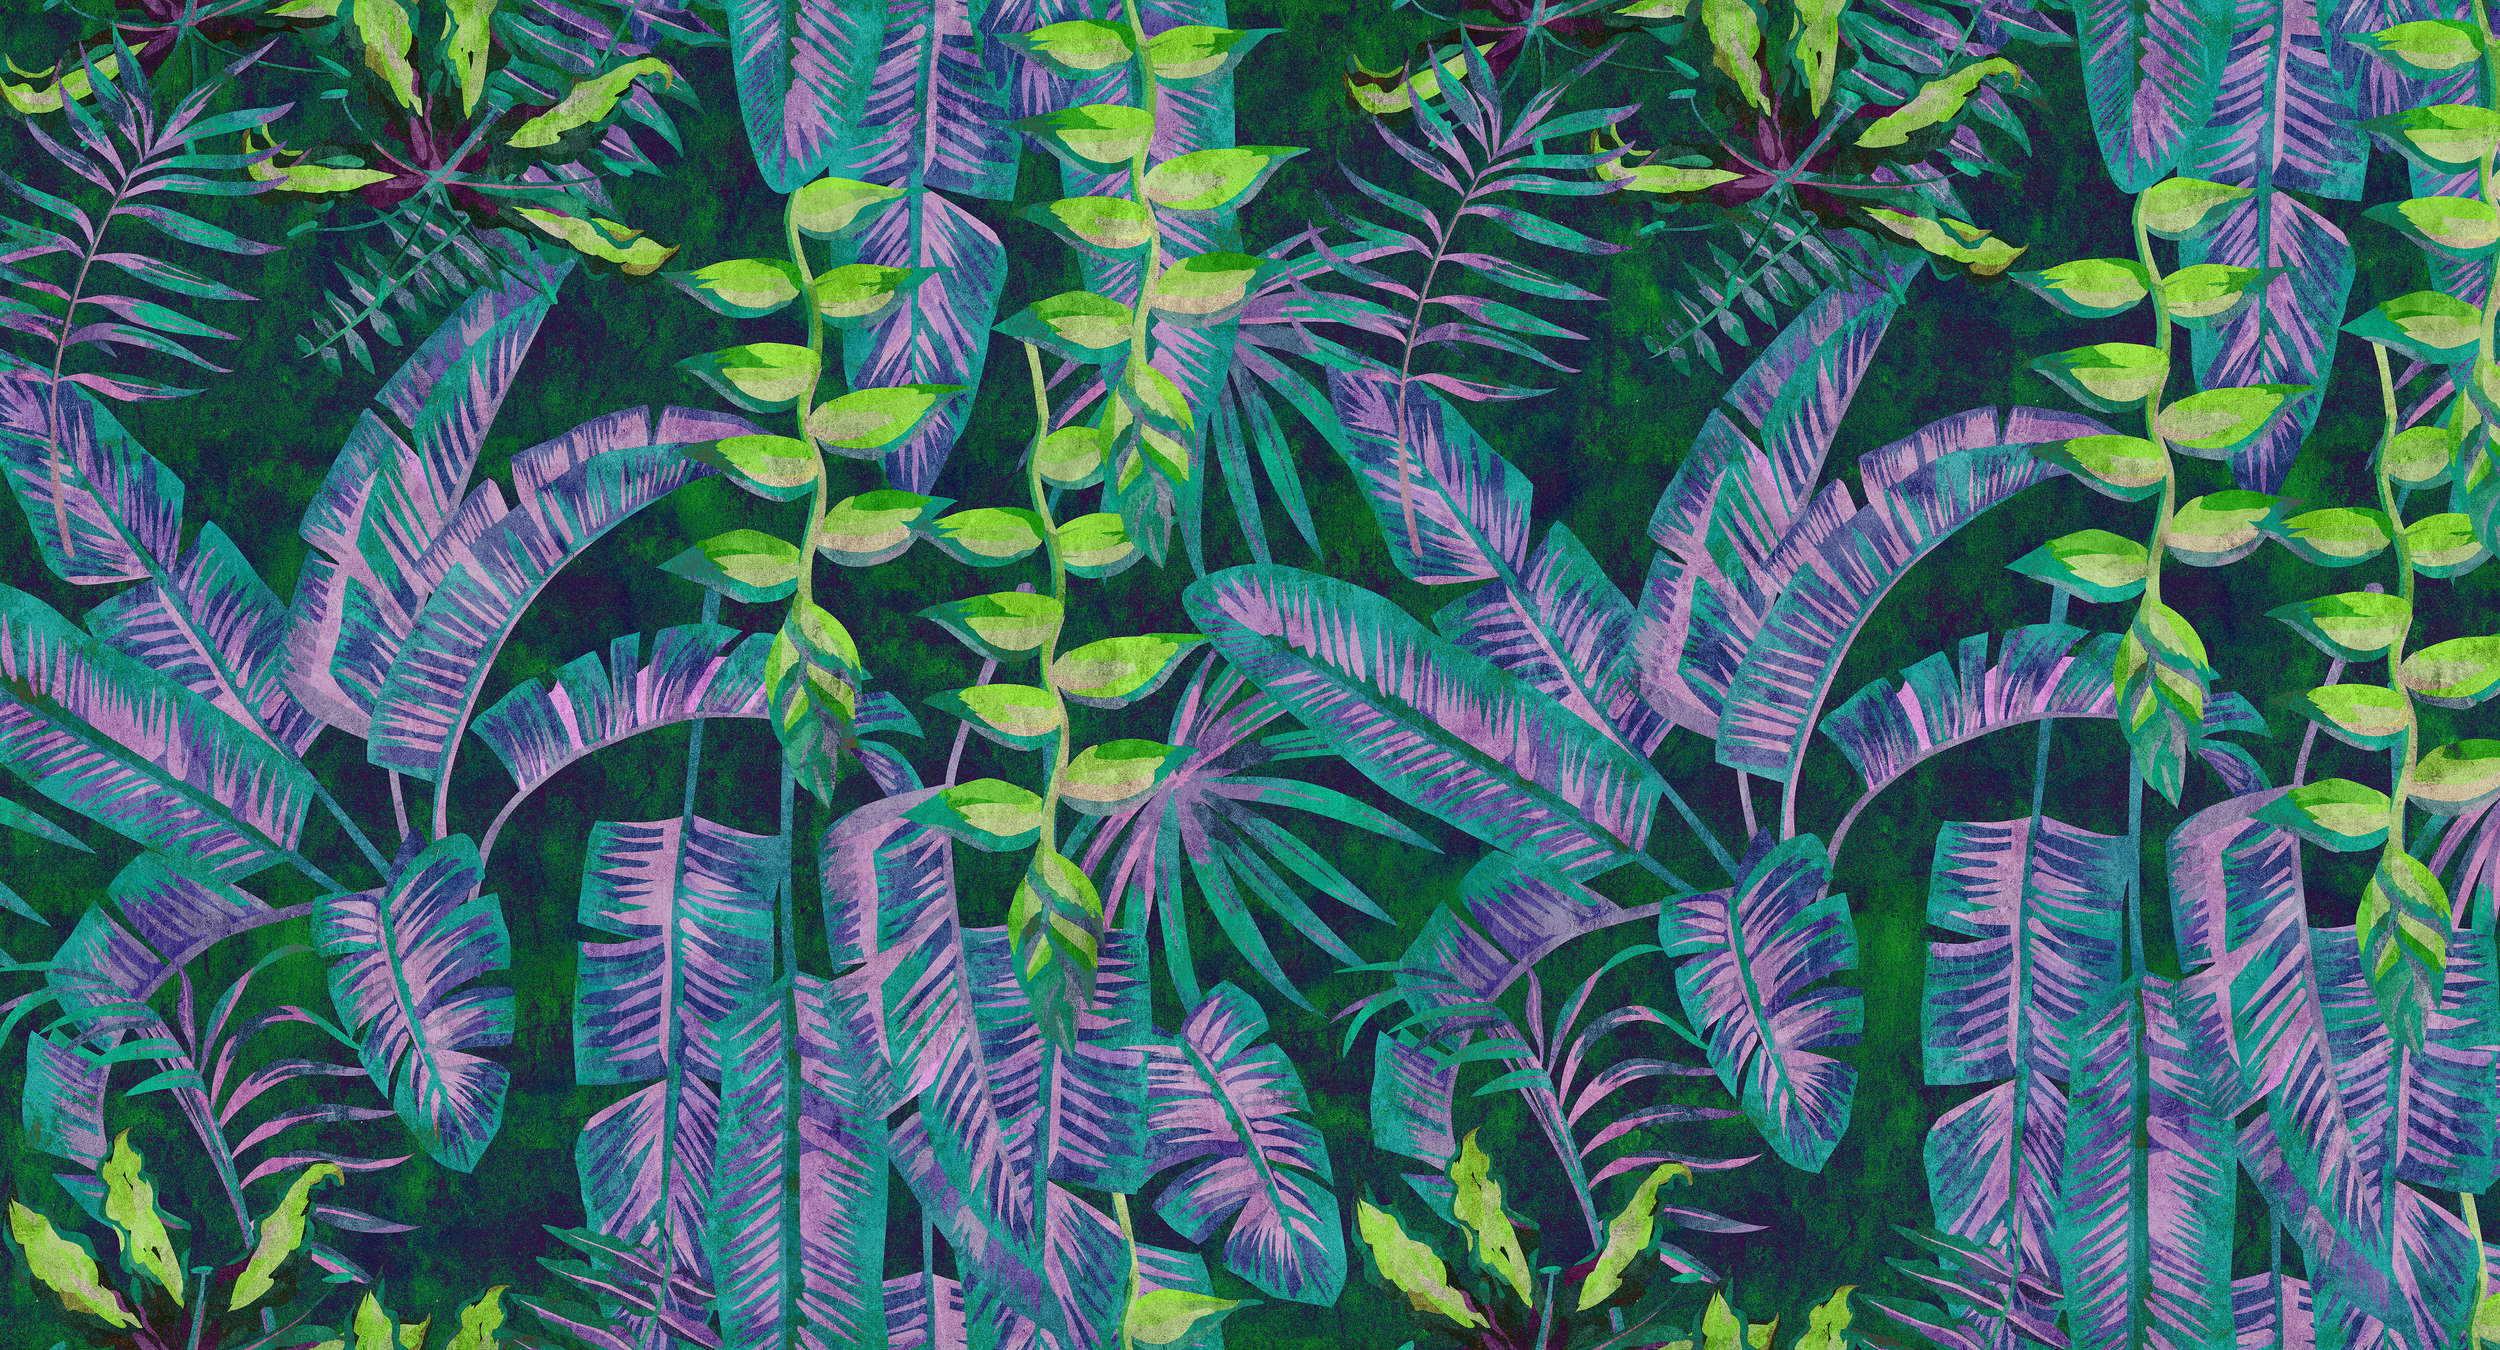             Tropicana 5 - Jungle wallpaper with neon colours in blotting paper structure - Blue, Green | Premium smooth fleece
        